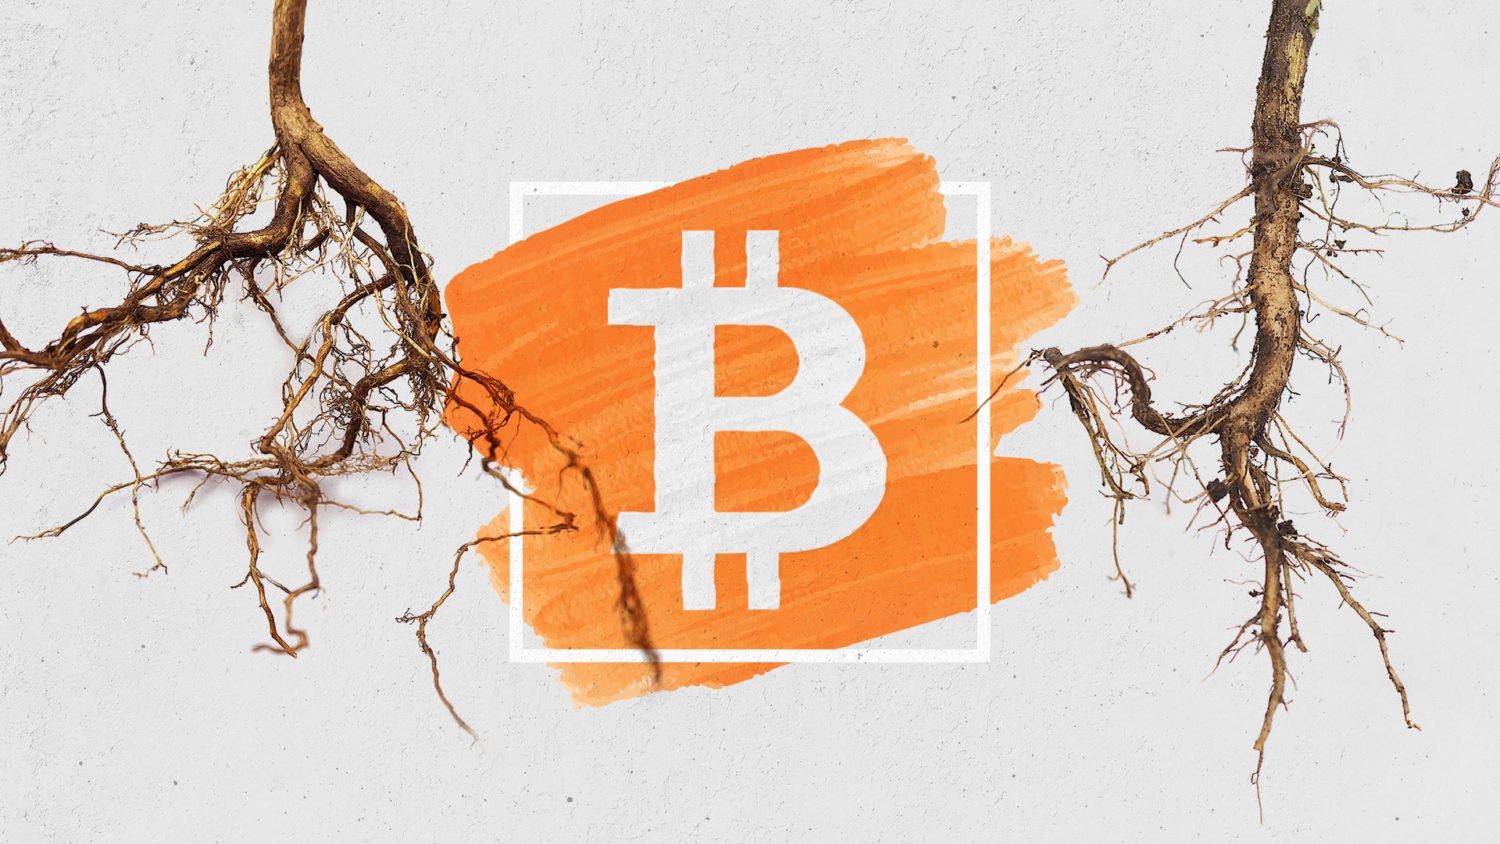 Taproot signaling begins for Bitcoin, but immediate consensus may be out of reach